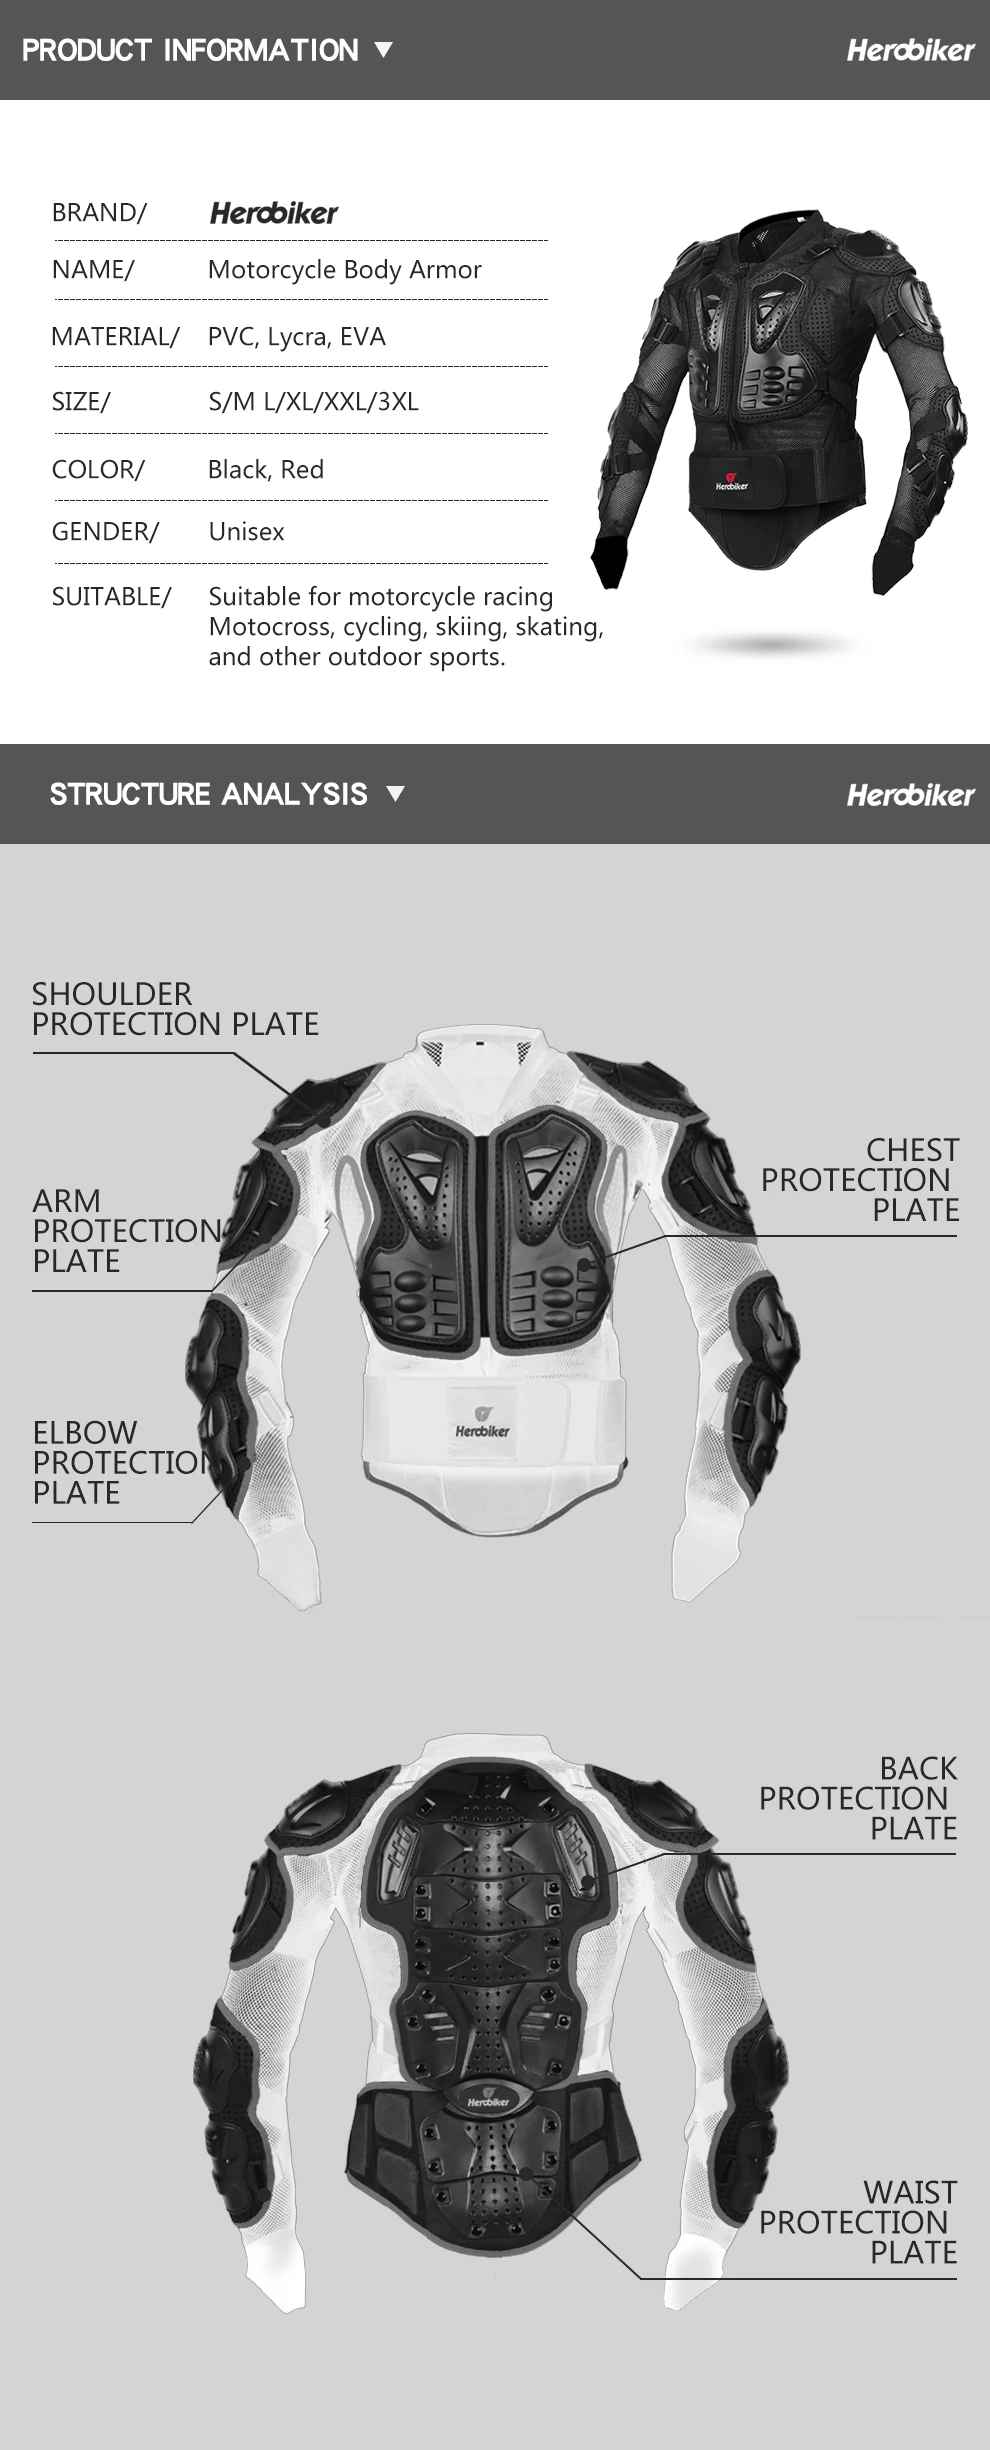 HEROBIKER Motorcycle Jacket Protective Gear Motocross Gear Armor Body Chest Motor Rider Racing Jacket Motorcycle Protection 8